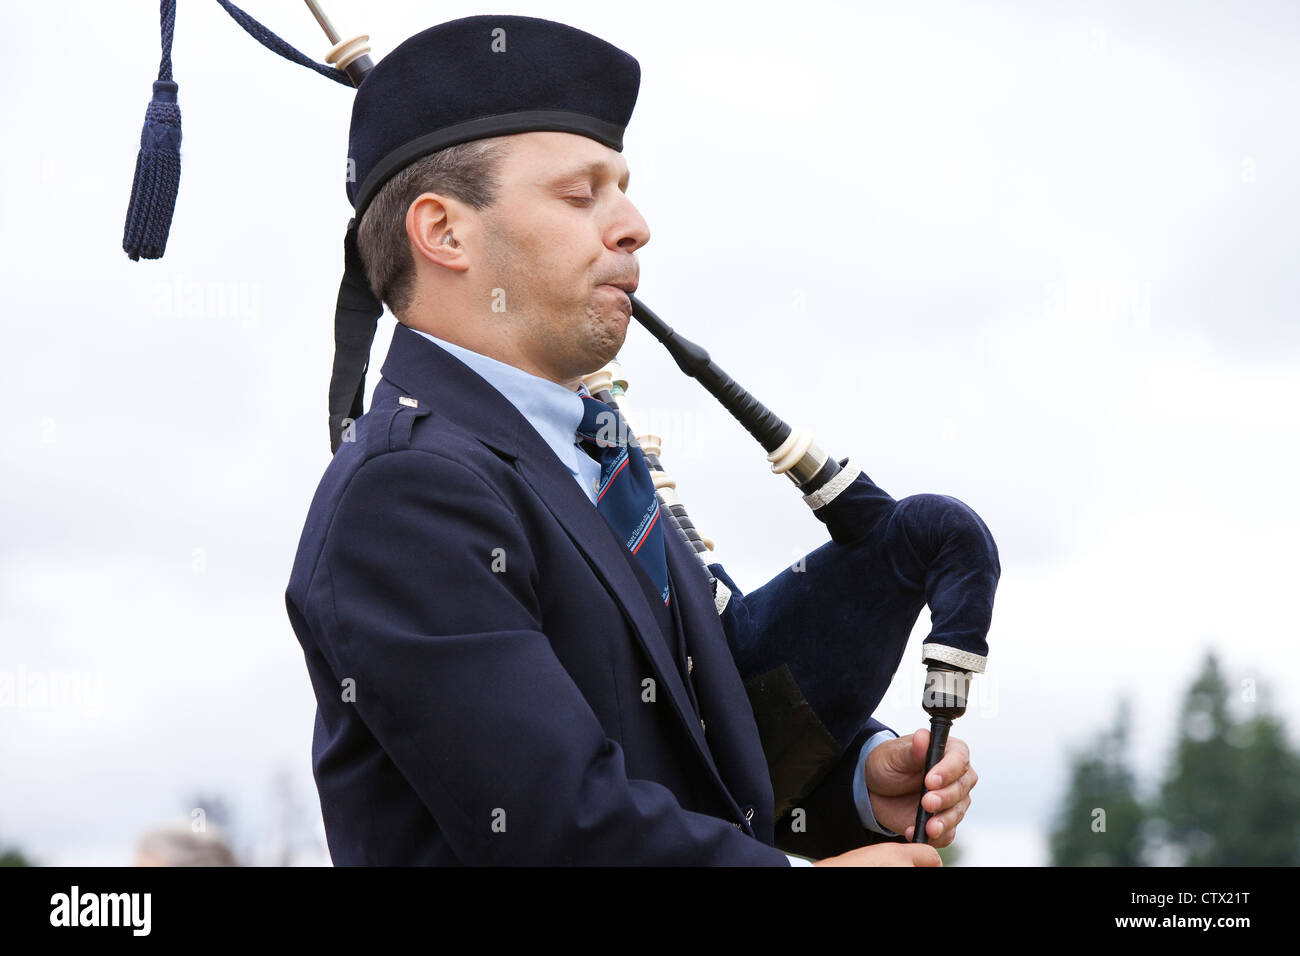 Bagpiper performing at the 66th Annual Pacific Northwest Scottish Highland Games and Clan Gathering - Enumclaw, Washington. Stock Photo